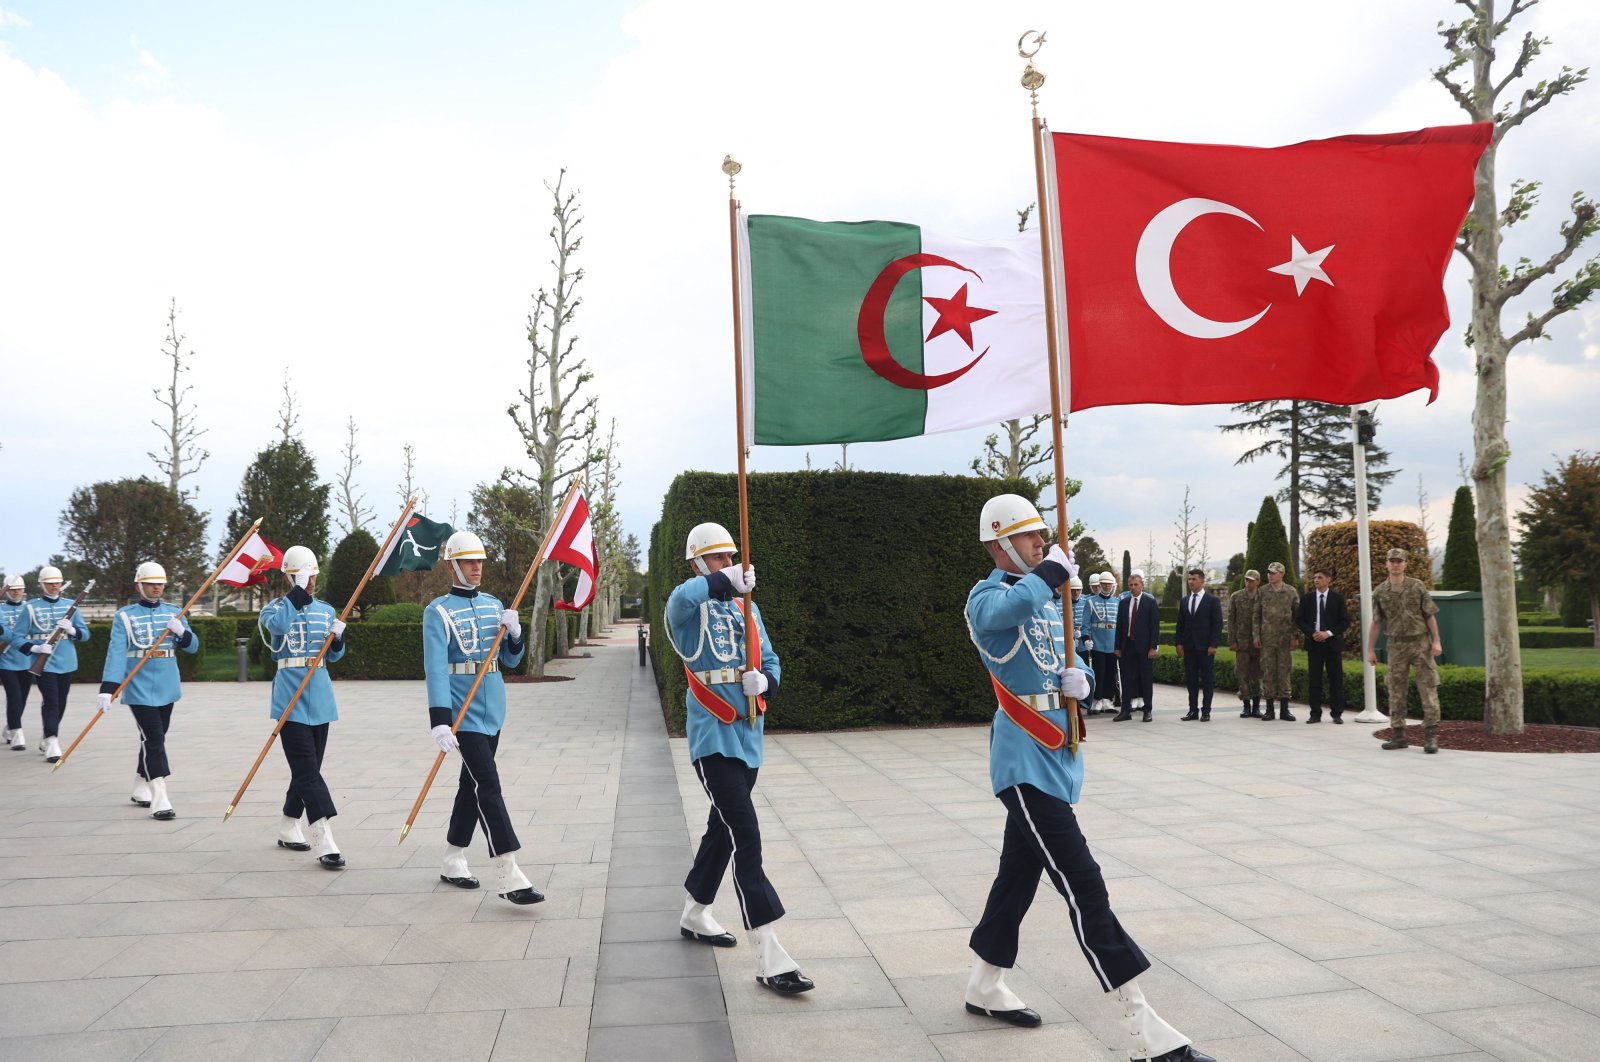 Guards carry Turkish and Algerian flags during an official ceremony at the Presidential Complex in Ankara, Turkey, May 16, 2022. (AFP Photo)